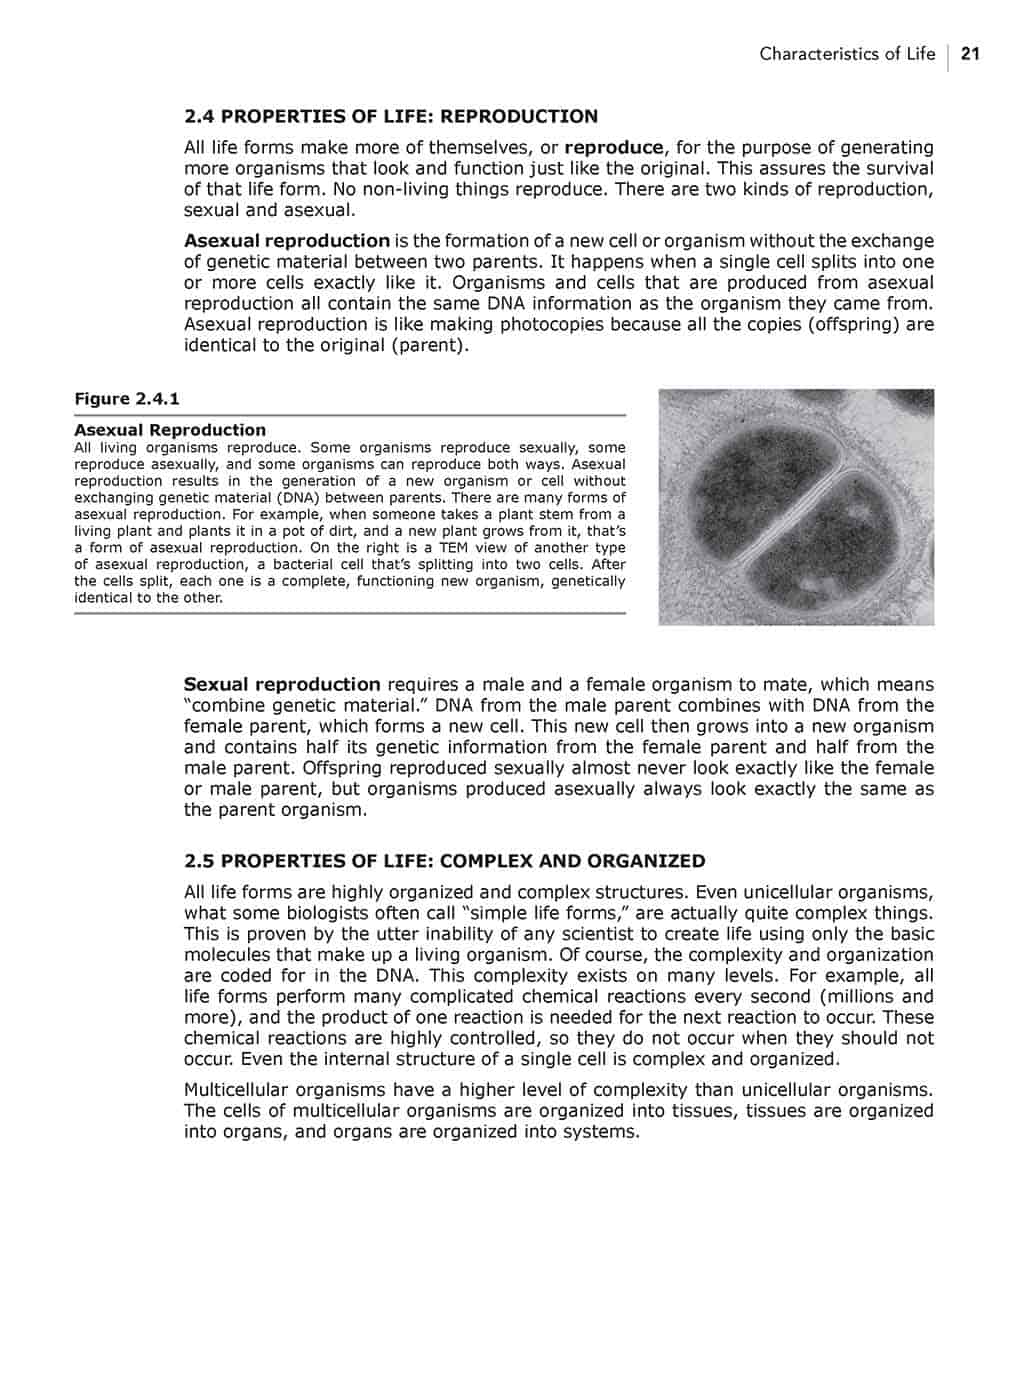 Home school Life Science textbook chapter 2 sample page 4